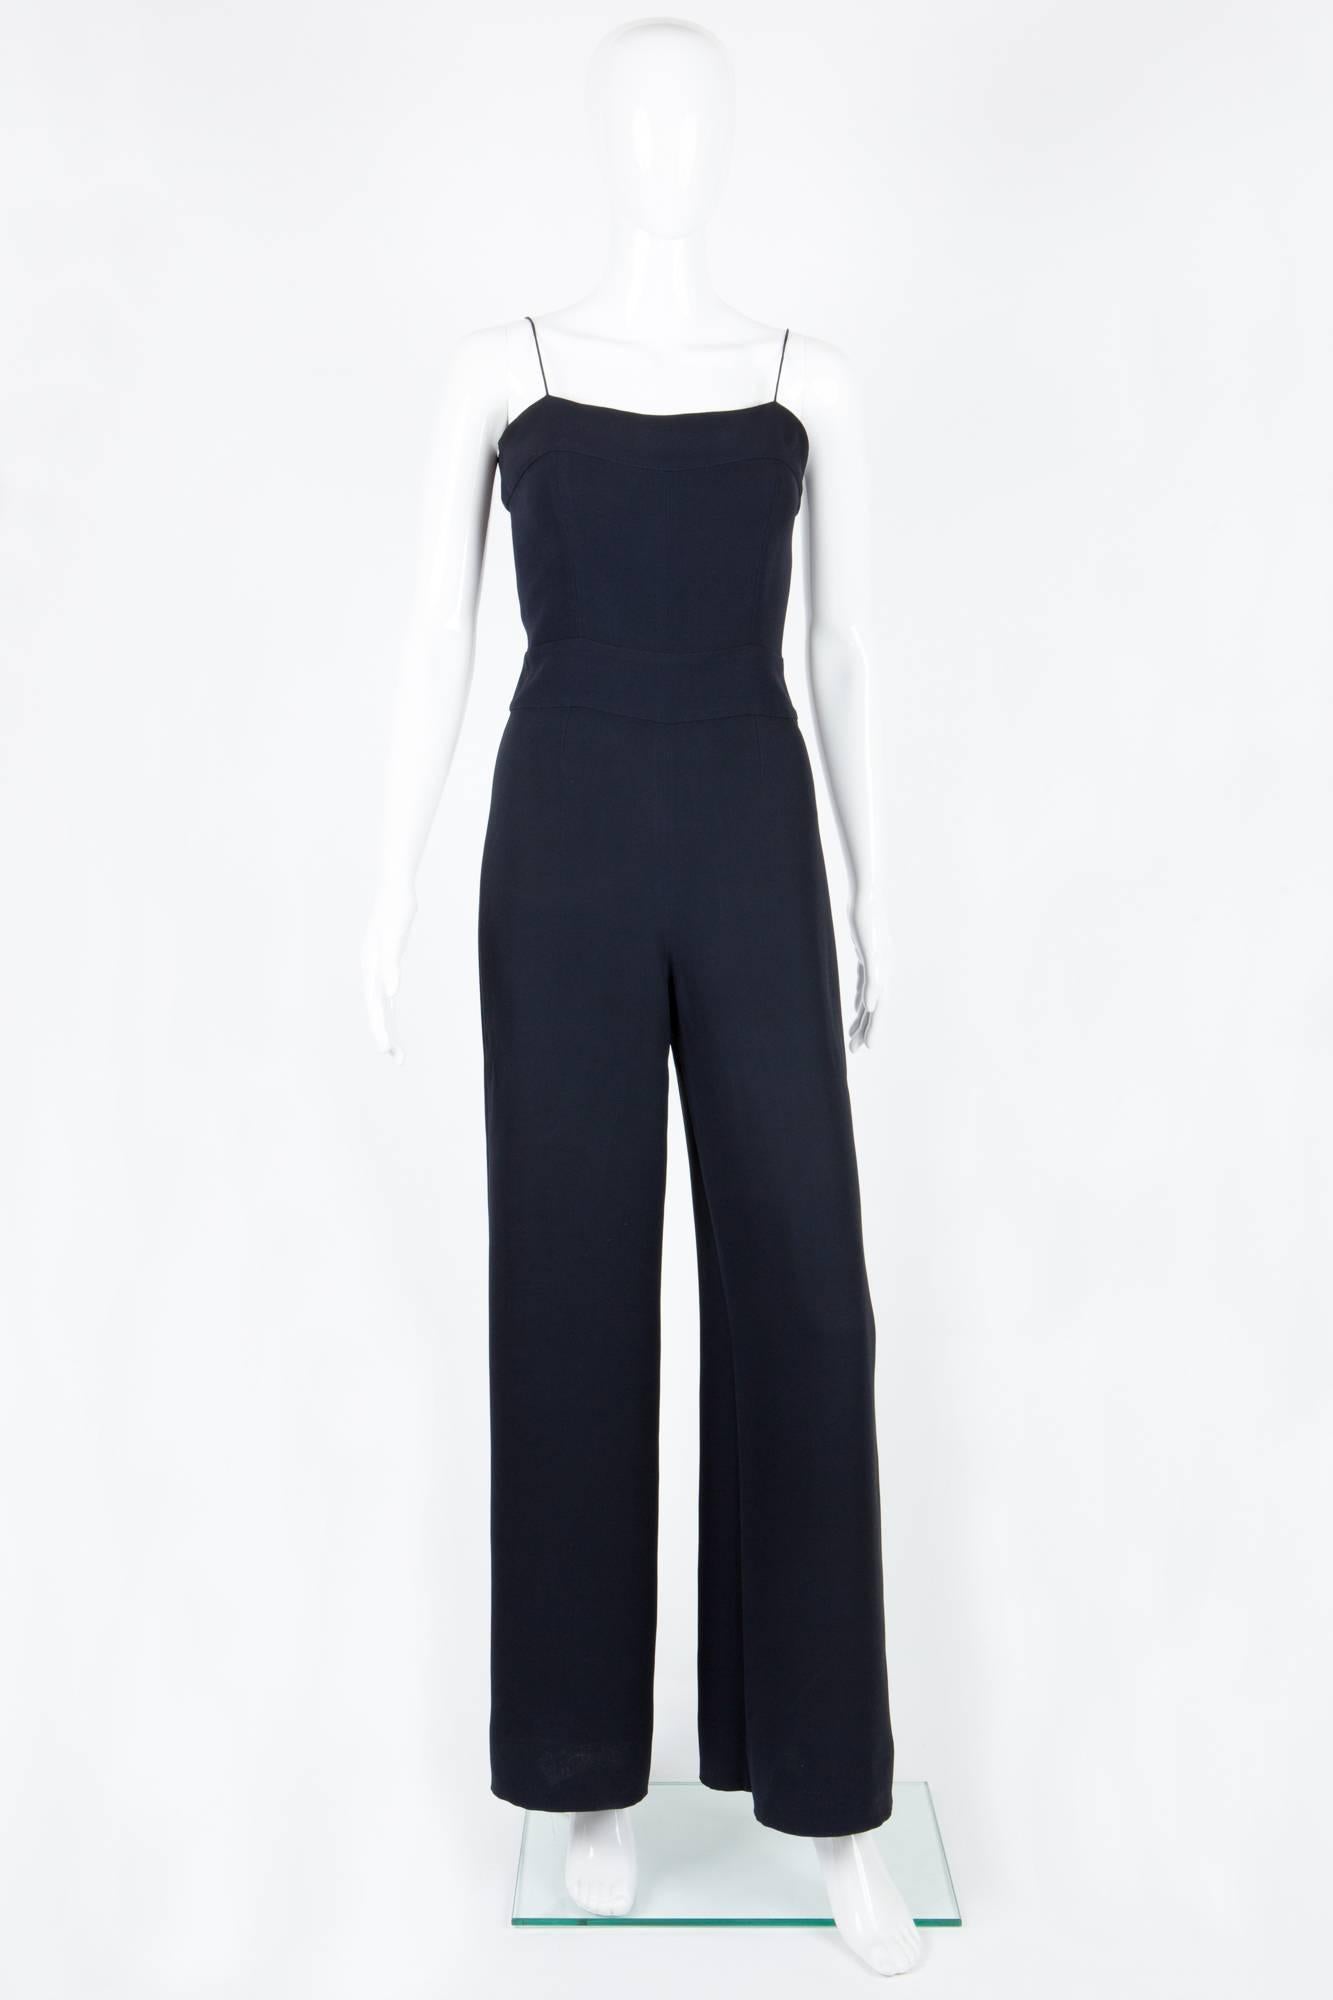 1990s gorgeous Collector black Chanel jumpsuit featuring thin spaghetti straps,a center back logo zip. This model was the same as wore by Audrey Tautou in N°5 pub.
In excellent vintage condition. Made in France.
Chest 31,4 in. ( 80cm)
Waist